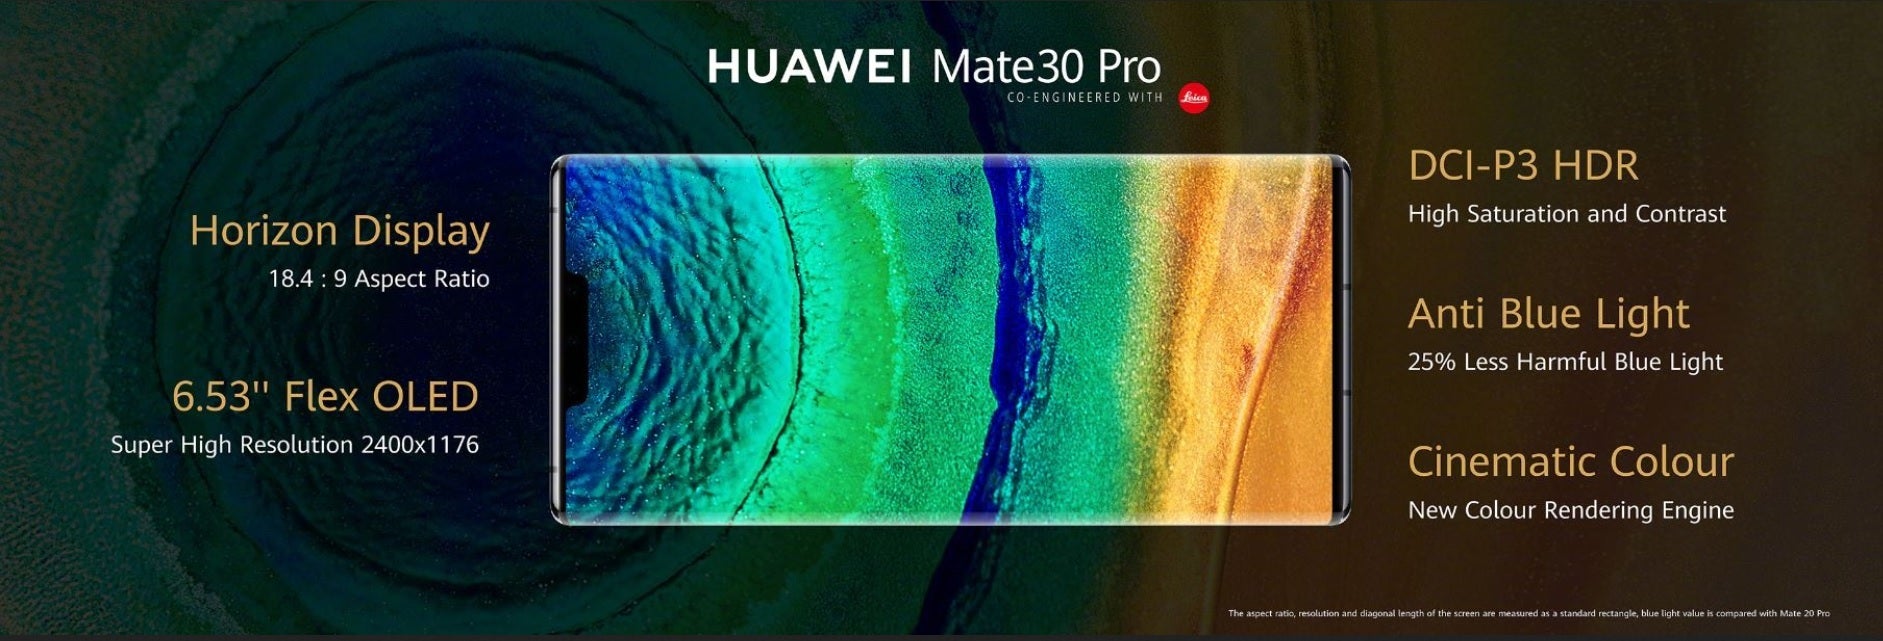 The Horizon Display used on the Huawei Mate 30 Pro - Alleged Huawei Mate 40 Pro 5G screen protector confirms a waterfall display for the upcoming flagship